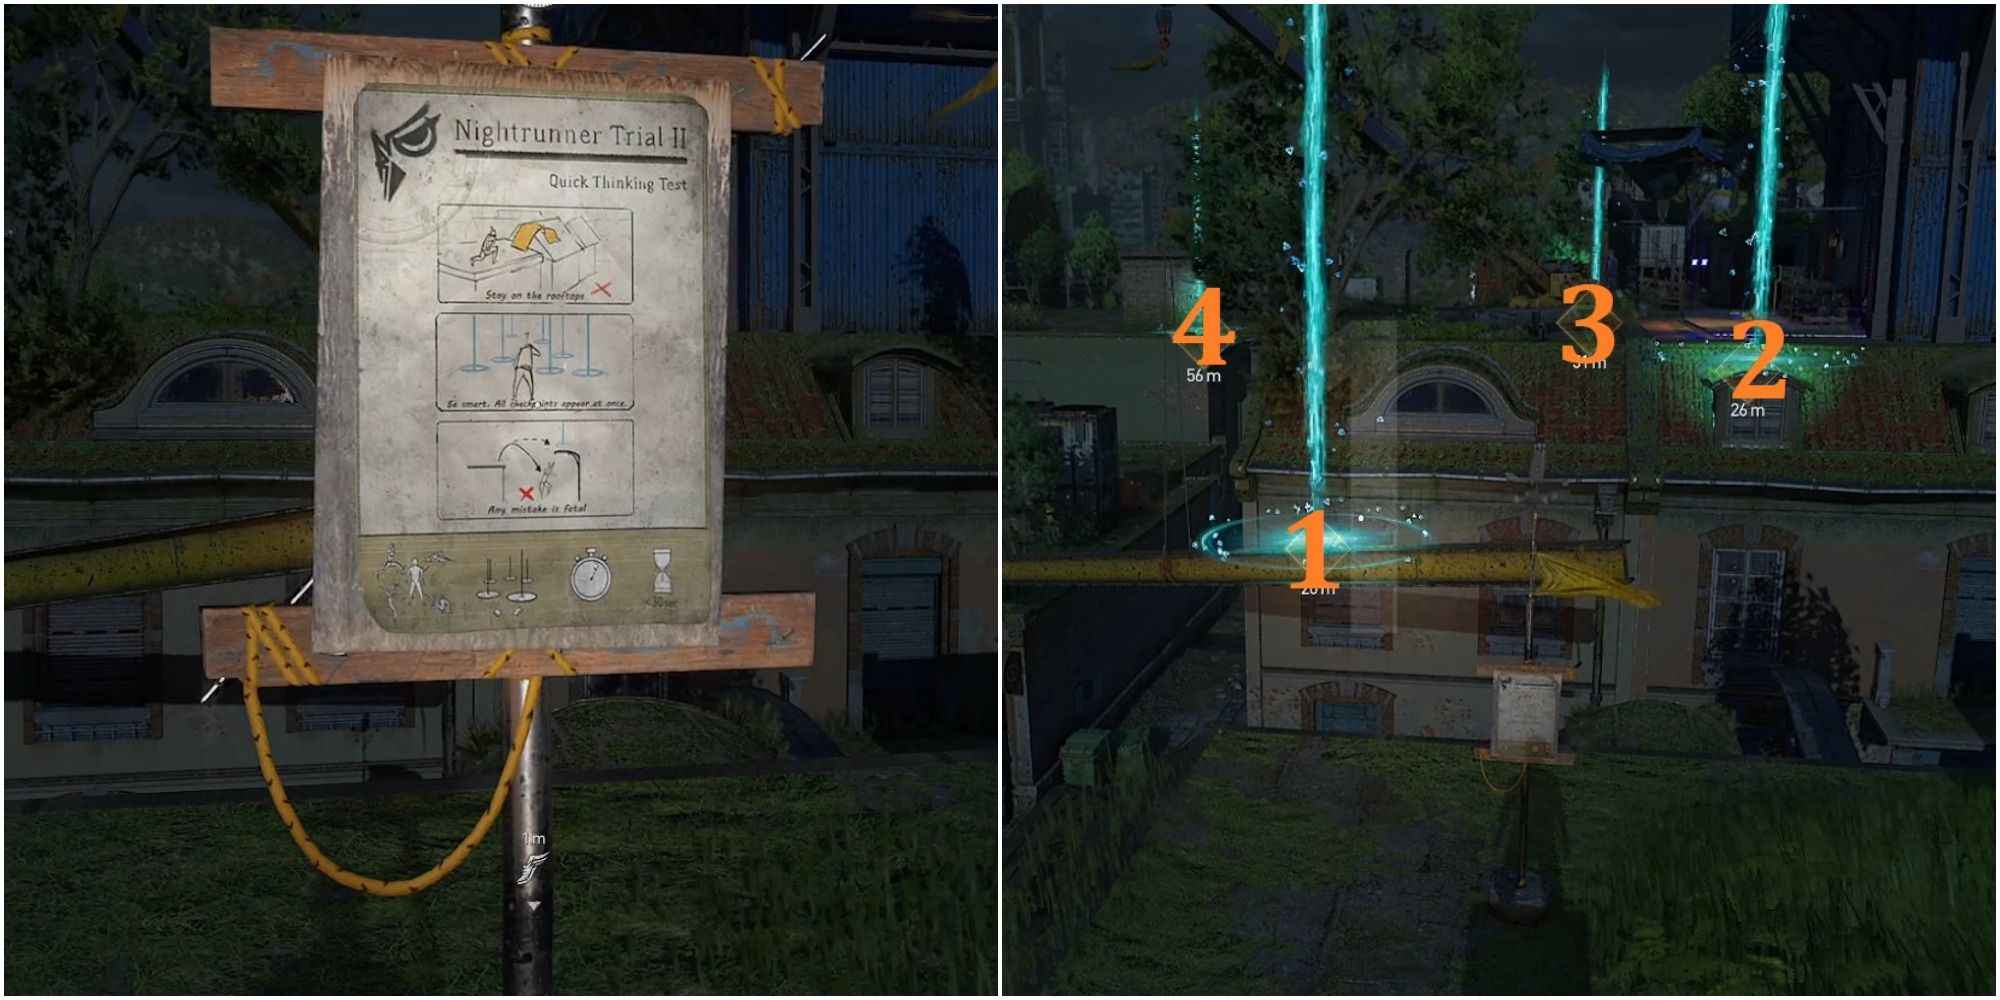 Dying Light 2 Nightrunner Trial II Collage Sign And Route